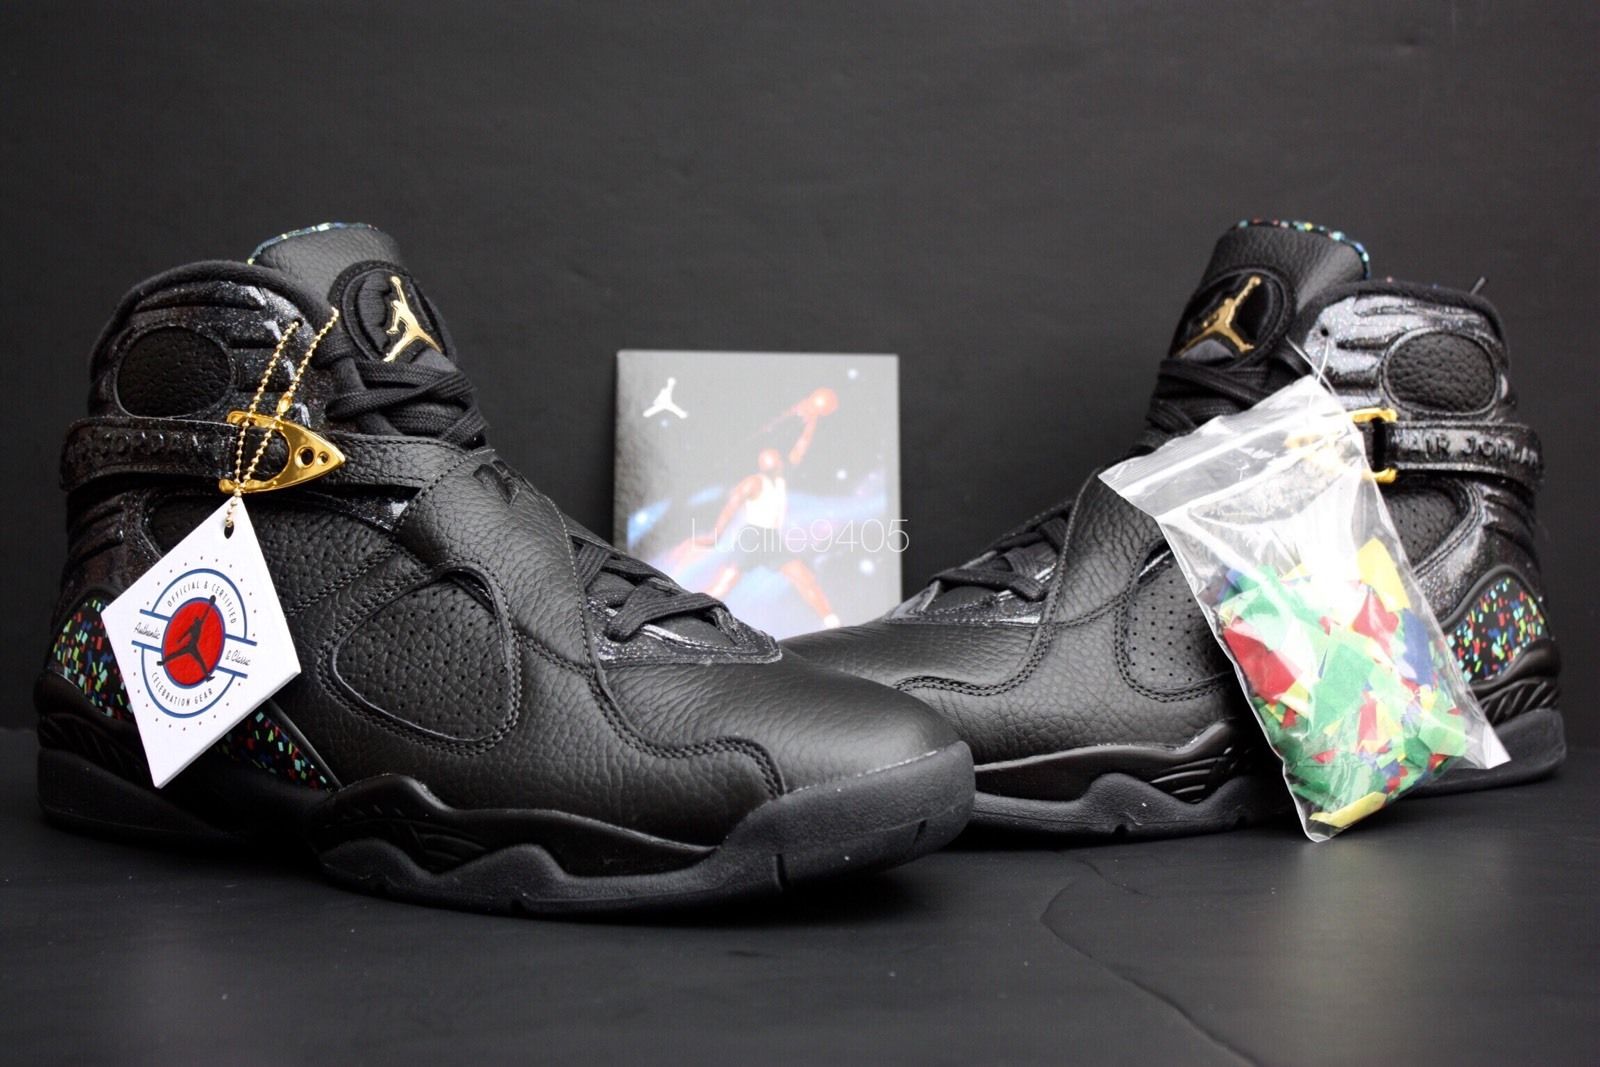 Air Jordan 8 Confetti from the Championship Pack - New Images - Air 23